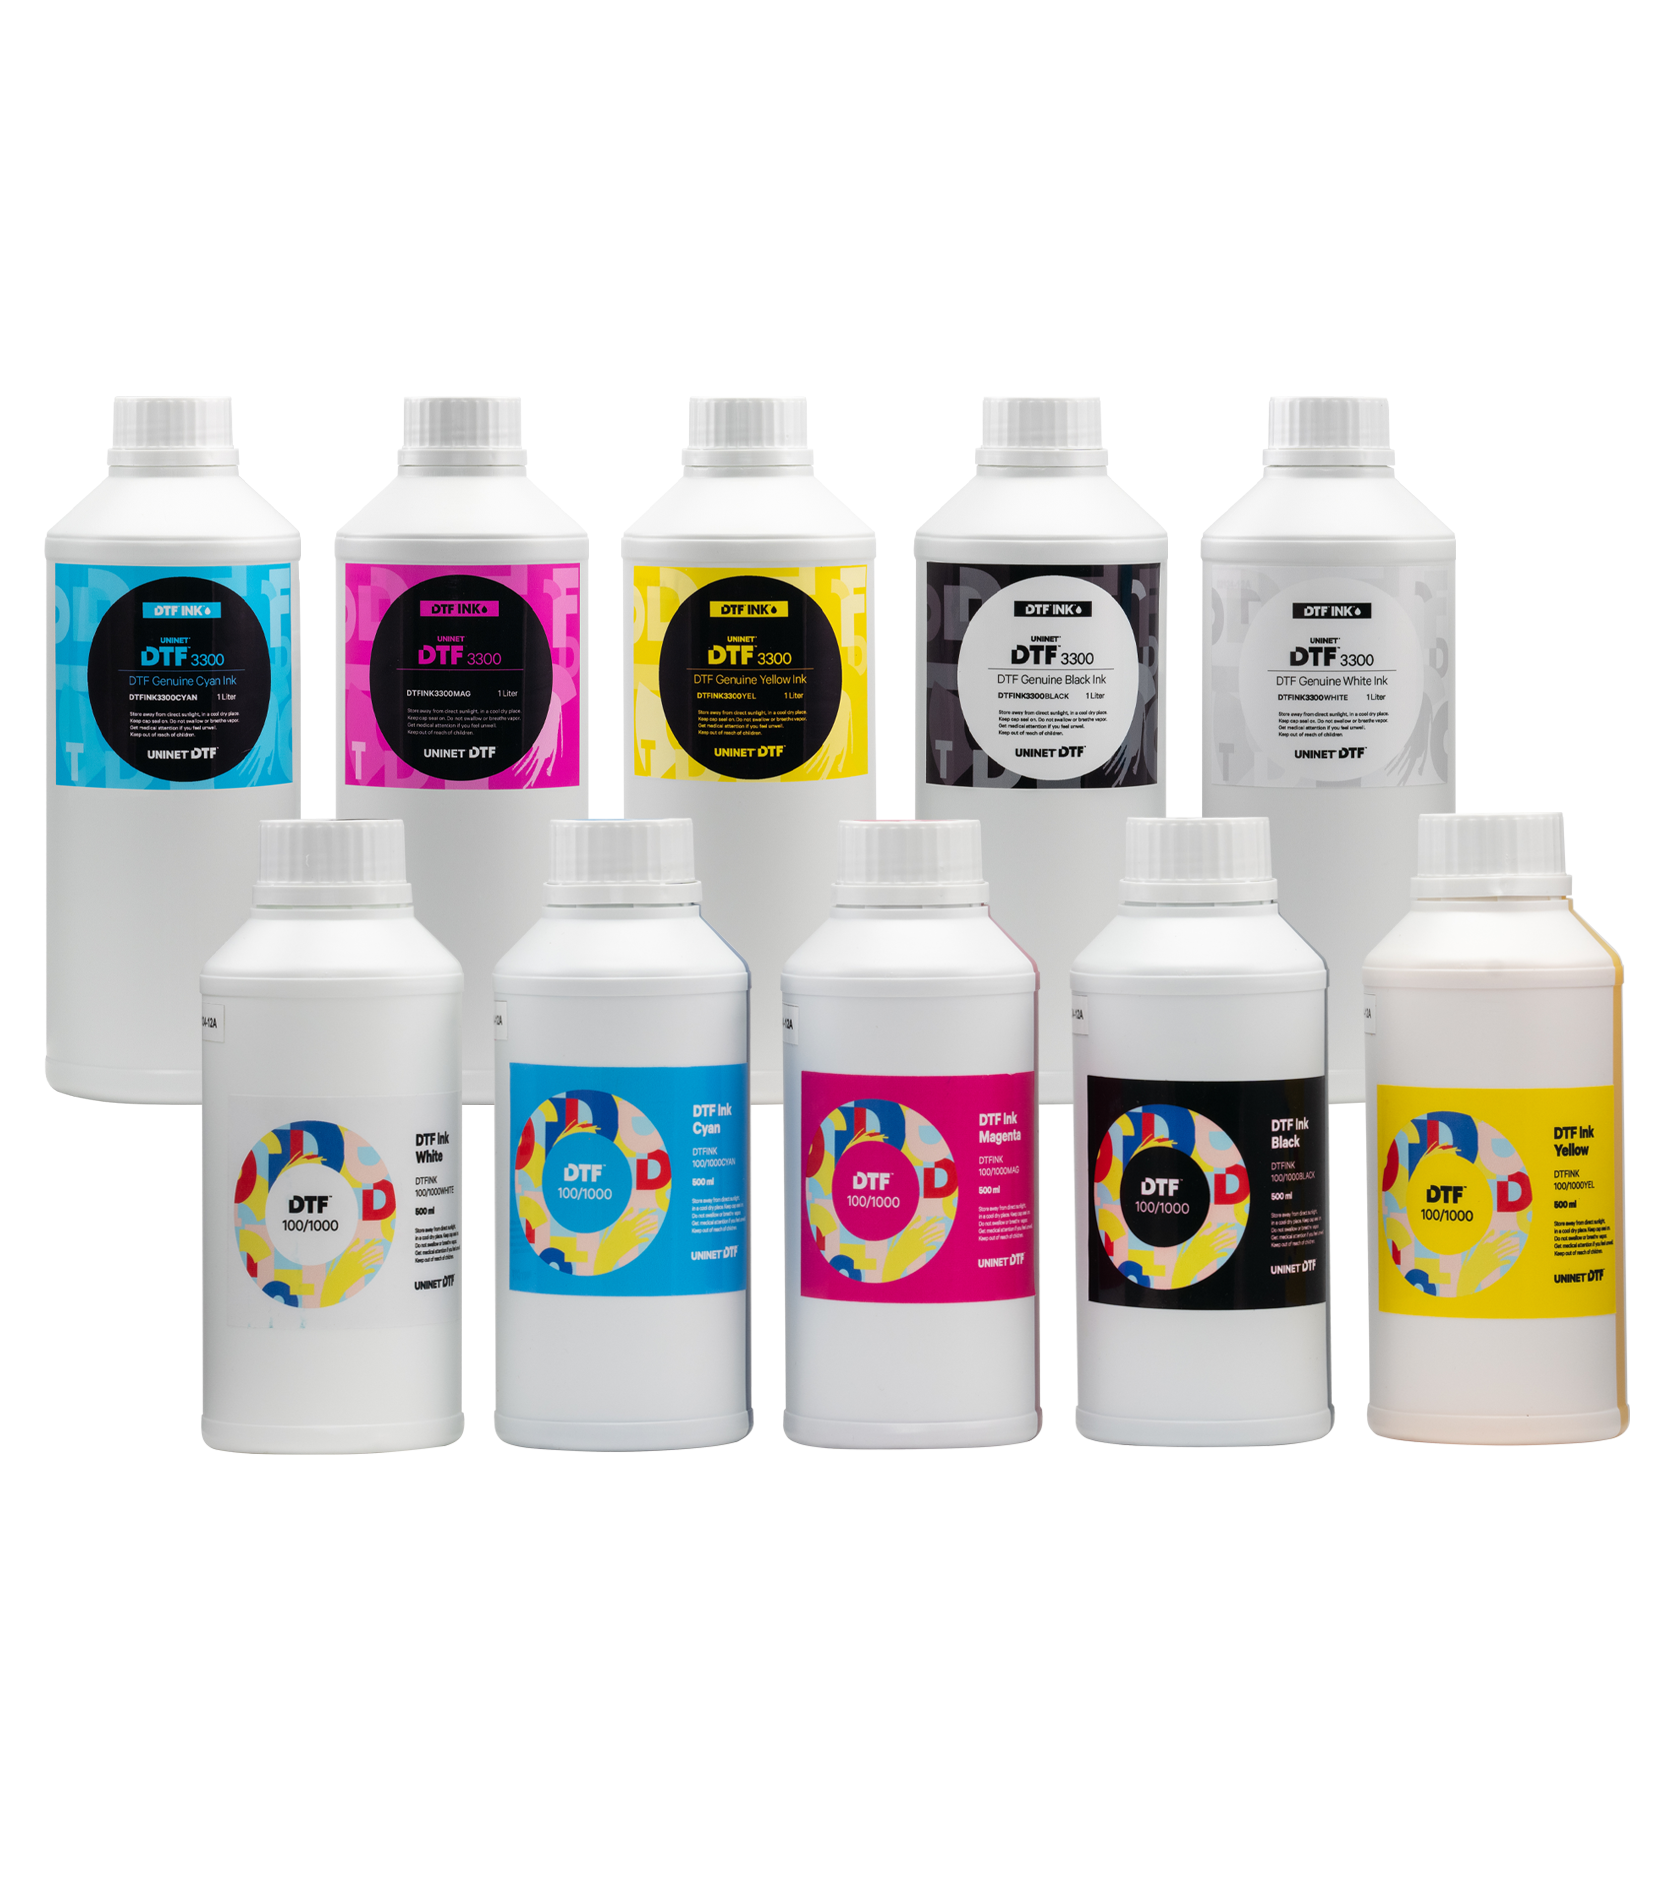 DTF Transfer Inks DTF textile printing ink is manufactured in the USA to be  compatible with Epson printheads. You can print and transfer your designs  to different textiles and fabrics using Direct